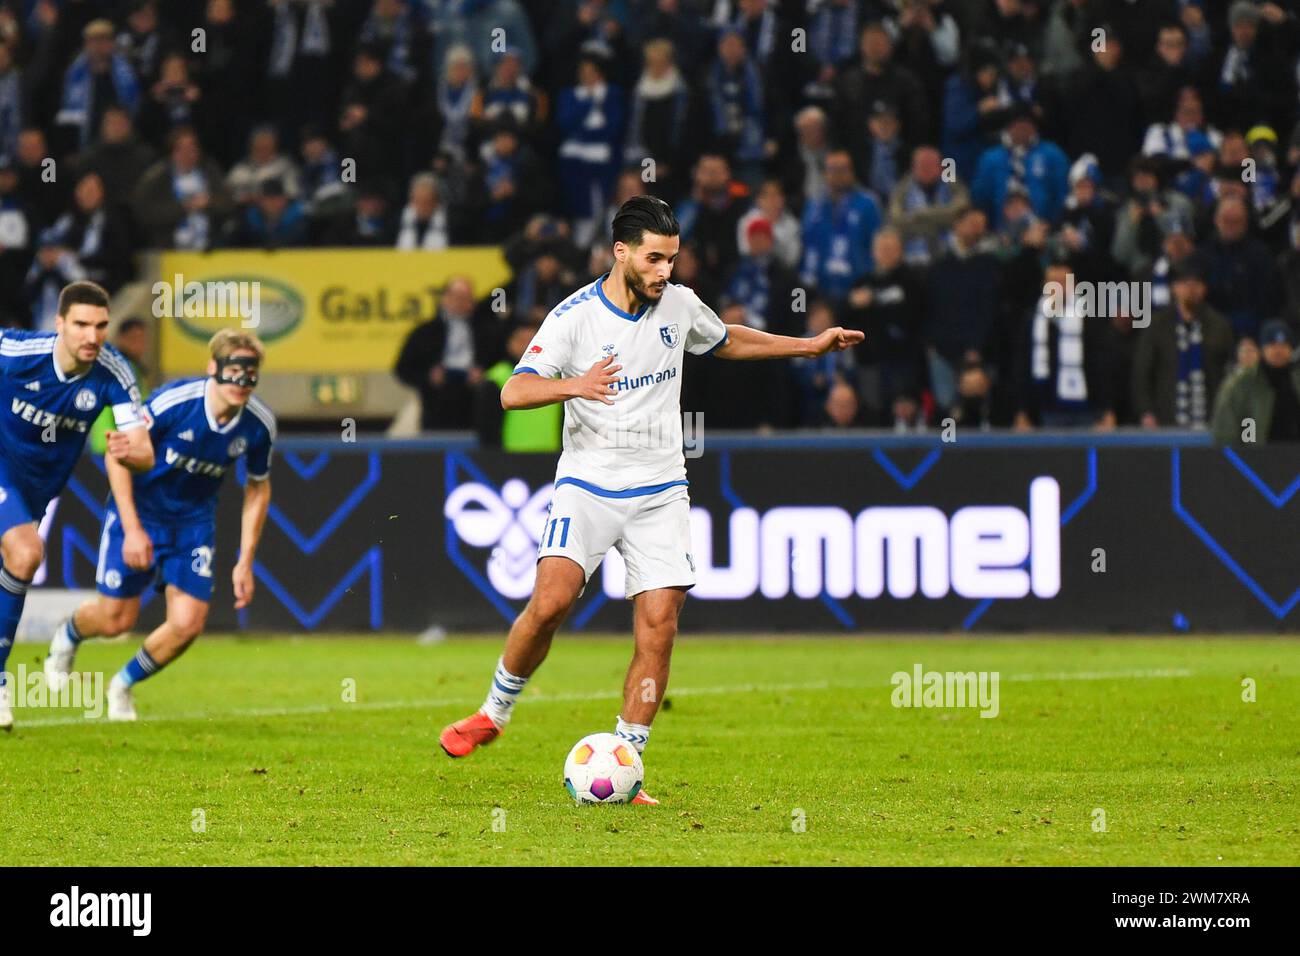 Magdeburg, Germany. 24th Feb, 2024. Soccer: Bundesliga 2, Matchday 23, 1. FC Magdeburg - FC Schalke 04, MDCC-Arena. Magdeburg's Mohammed El Hankouri scores from the penalty spot to make it 2-0. Credit: Christophe Gateau/dpa - IMPORTANT NOTE: In accordance with the regulations of the DFL German Football League and the DFB German Football Association, it is prohibited to utilize or have utilized photographs taken in the stadium and/or of the match in the form of sequential images and/or video-like photo series./dpa/Alamy Live News Stock Photo